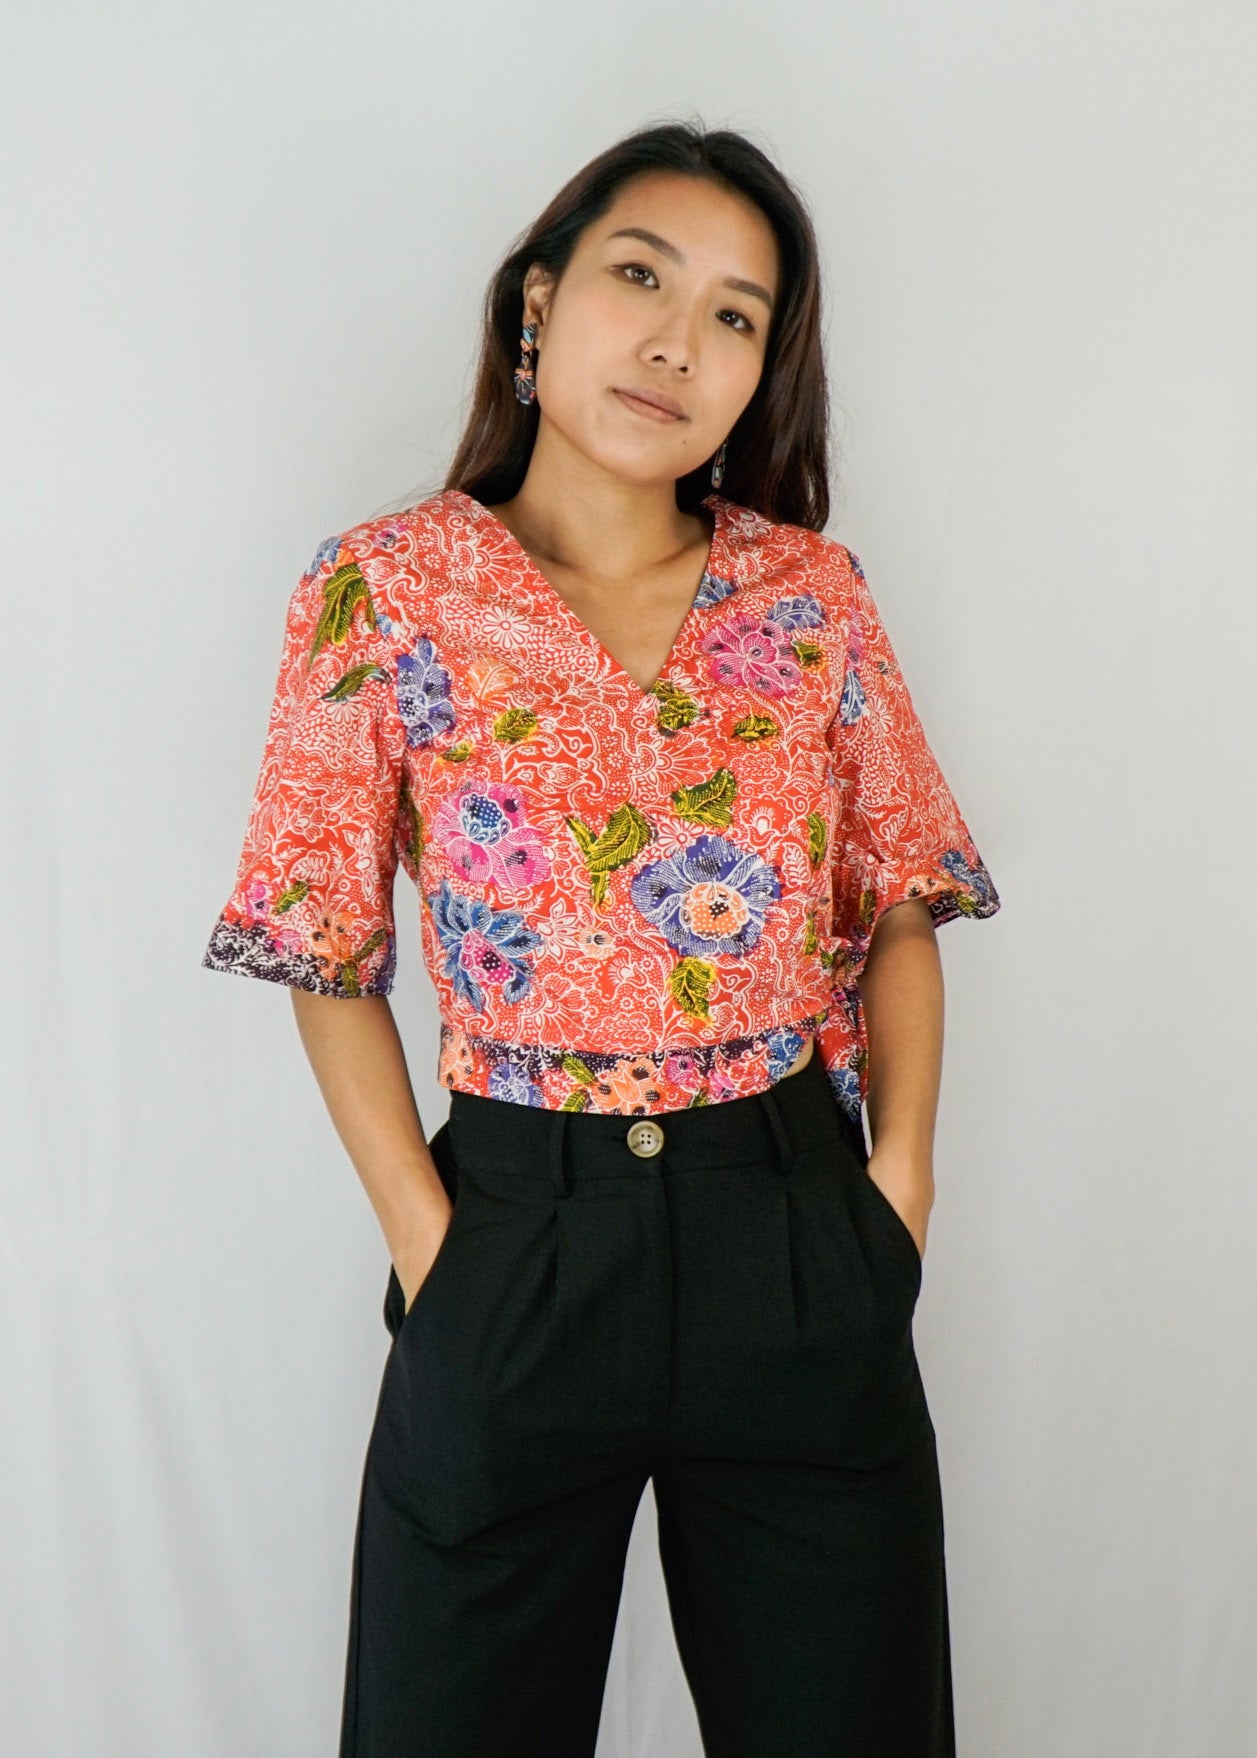 Tracy Flare Sleeves Top in Hand Drawn Blumen